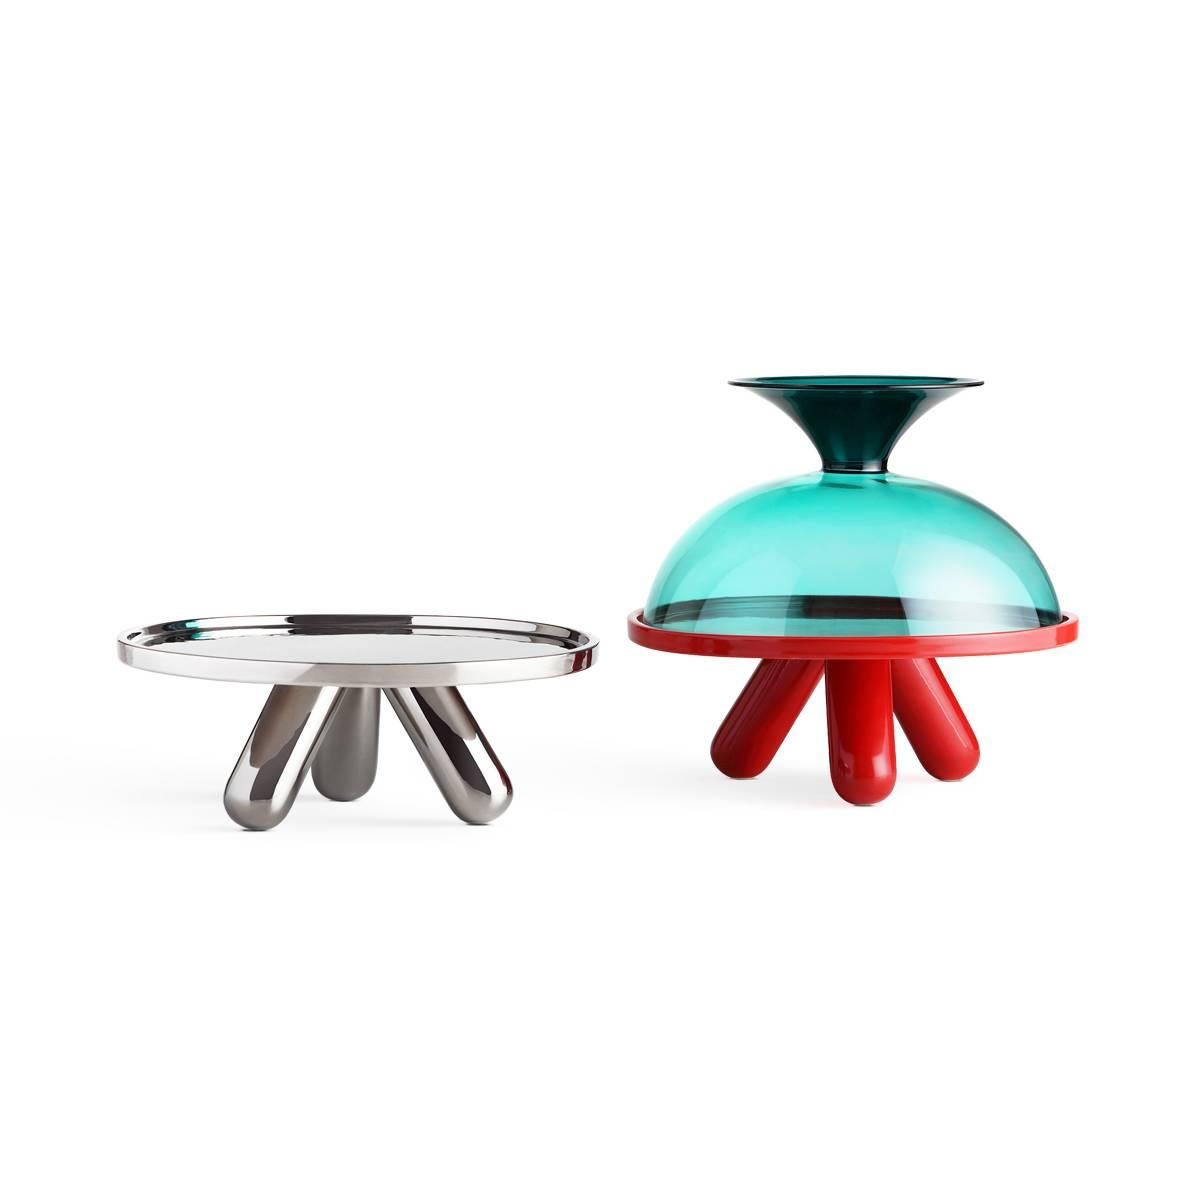 Gambone is a large ceramic riser with platinum finish designed by Aldo Cibic. The product is part of Table Joy collection: an upbeat, vividly colored and ever so slightly radical family of tableware that can be reassembled as desired, mixing colors,